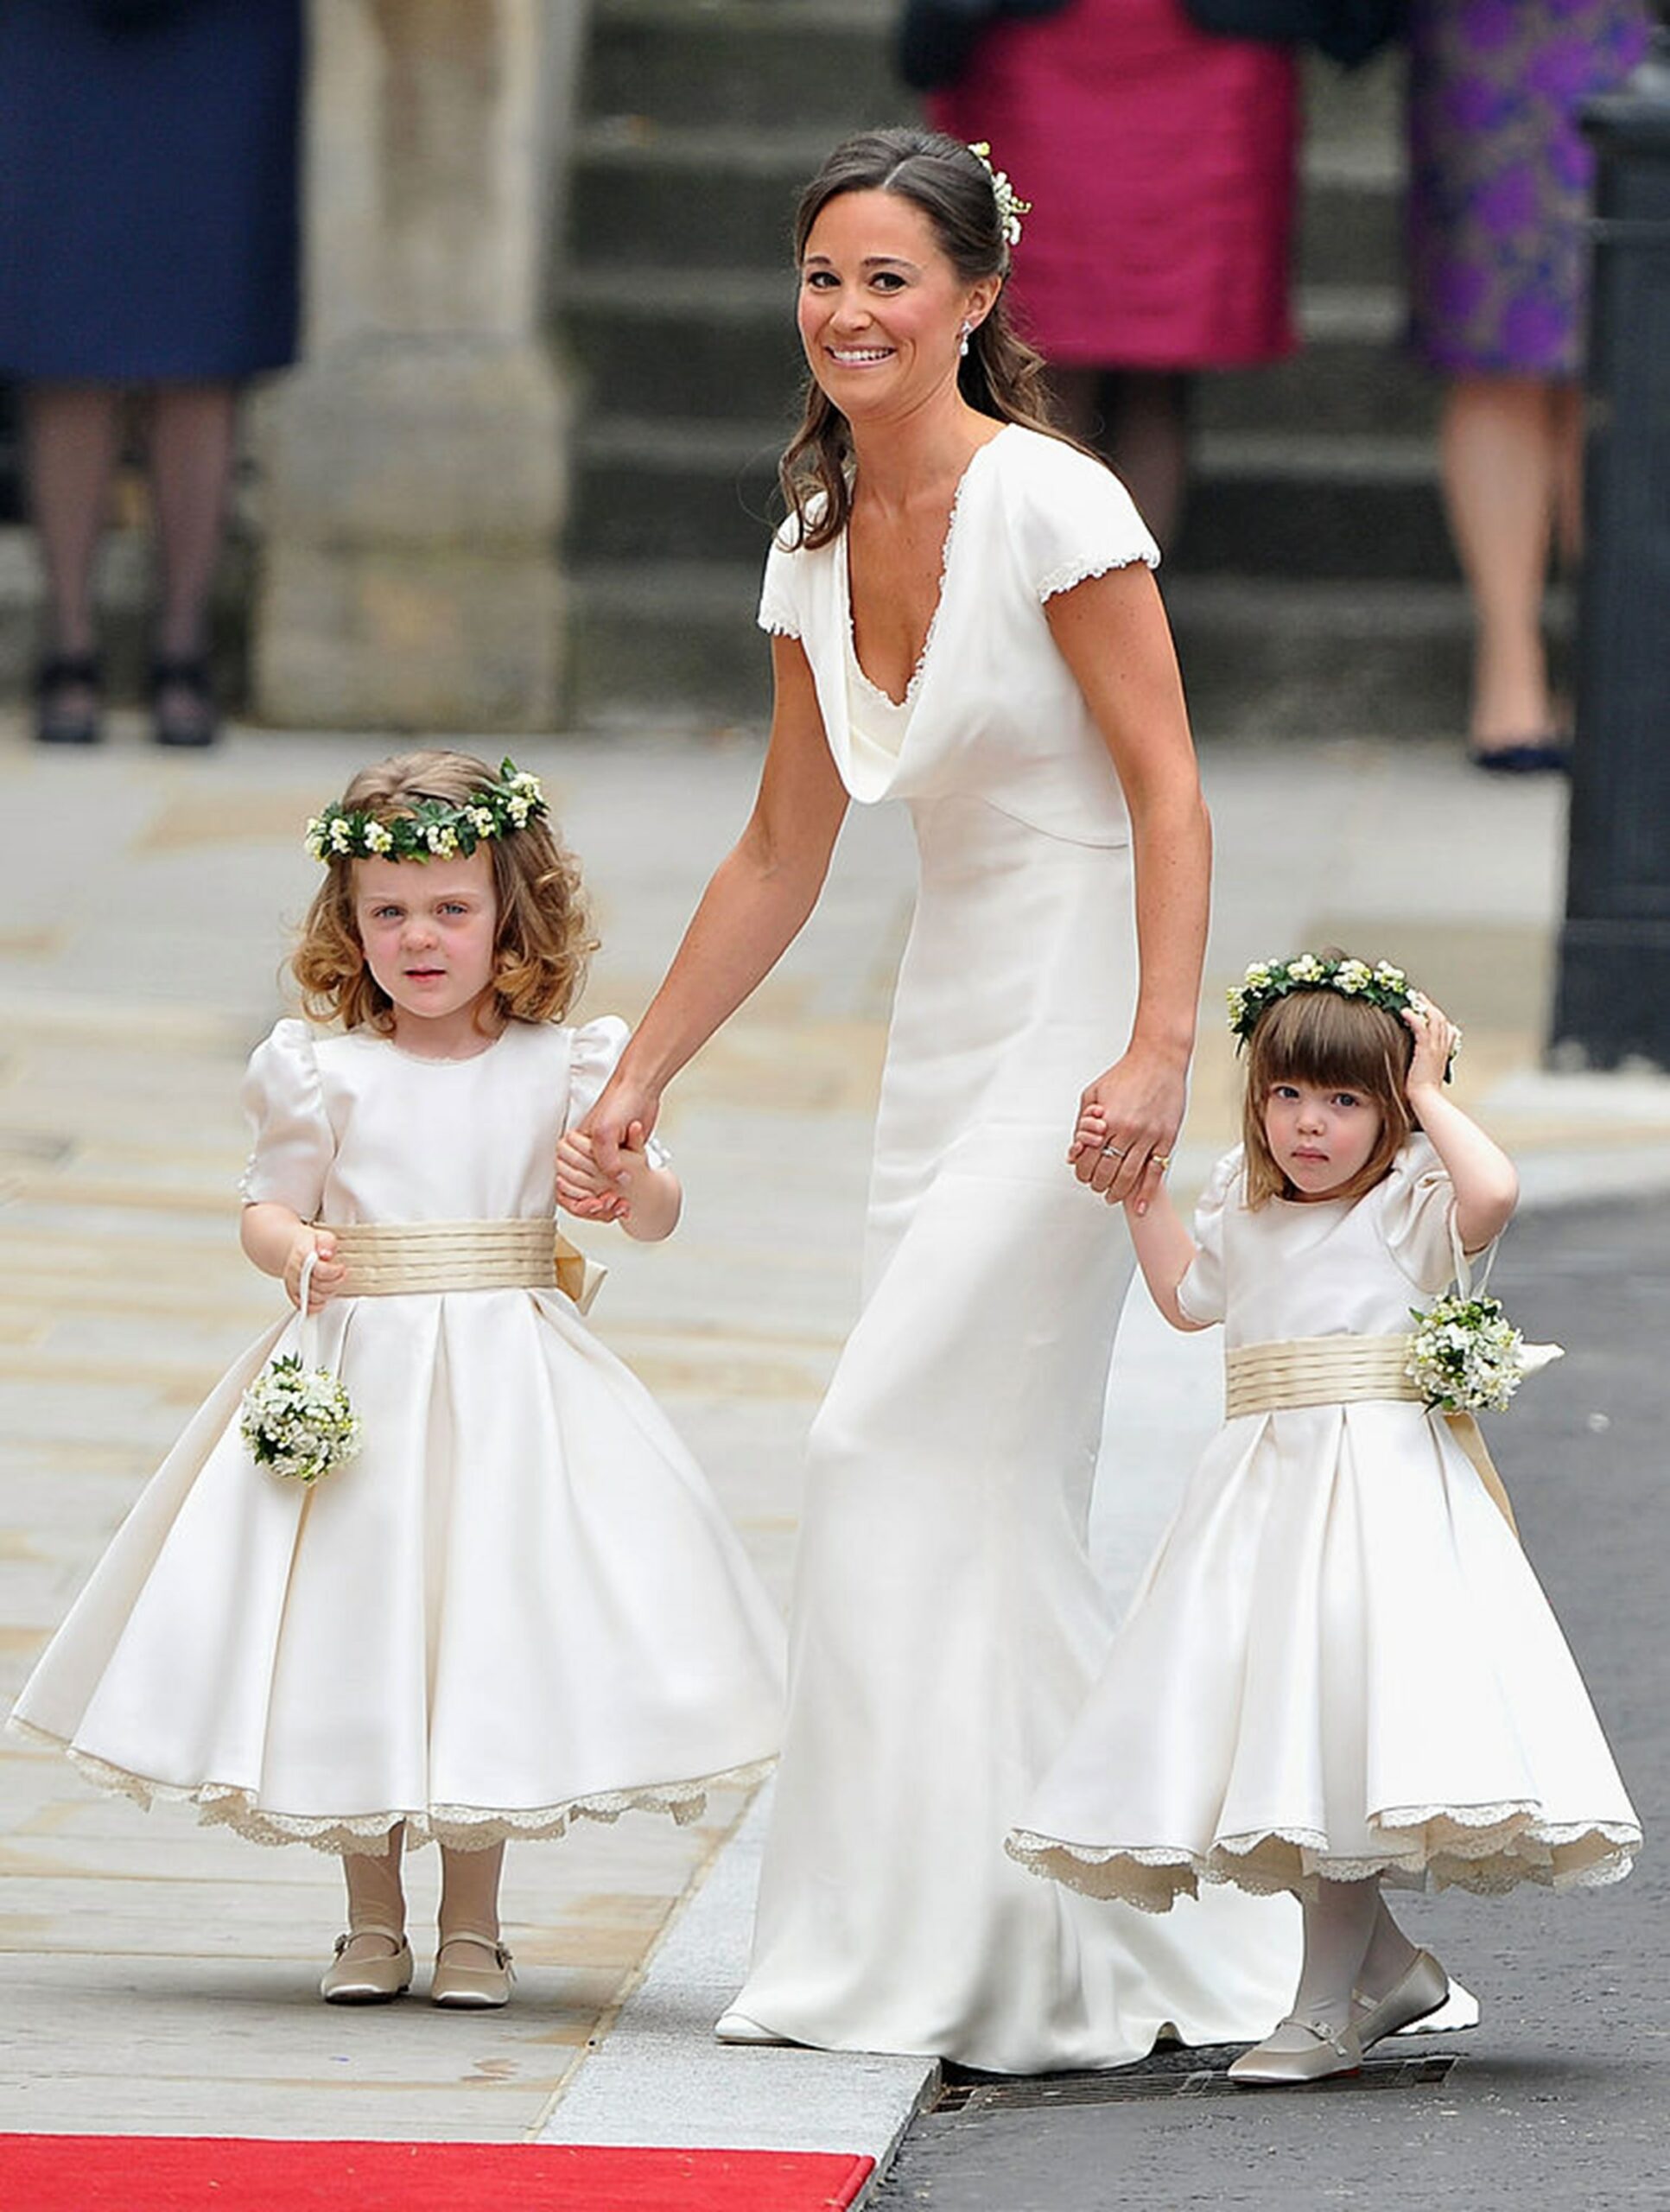 Bridesmaids at the wedding of Kate Middleton and Prince William